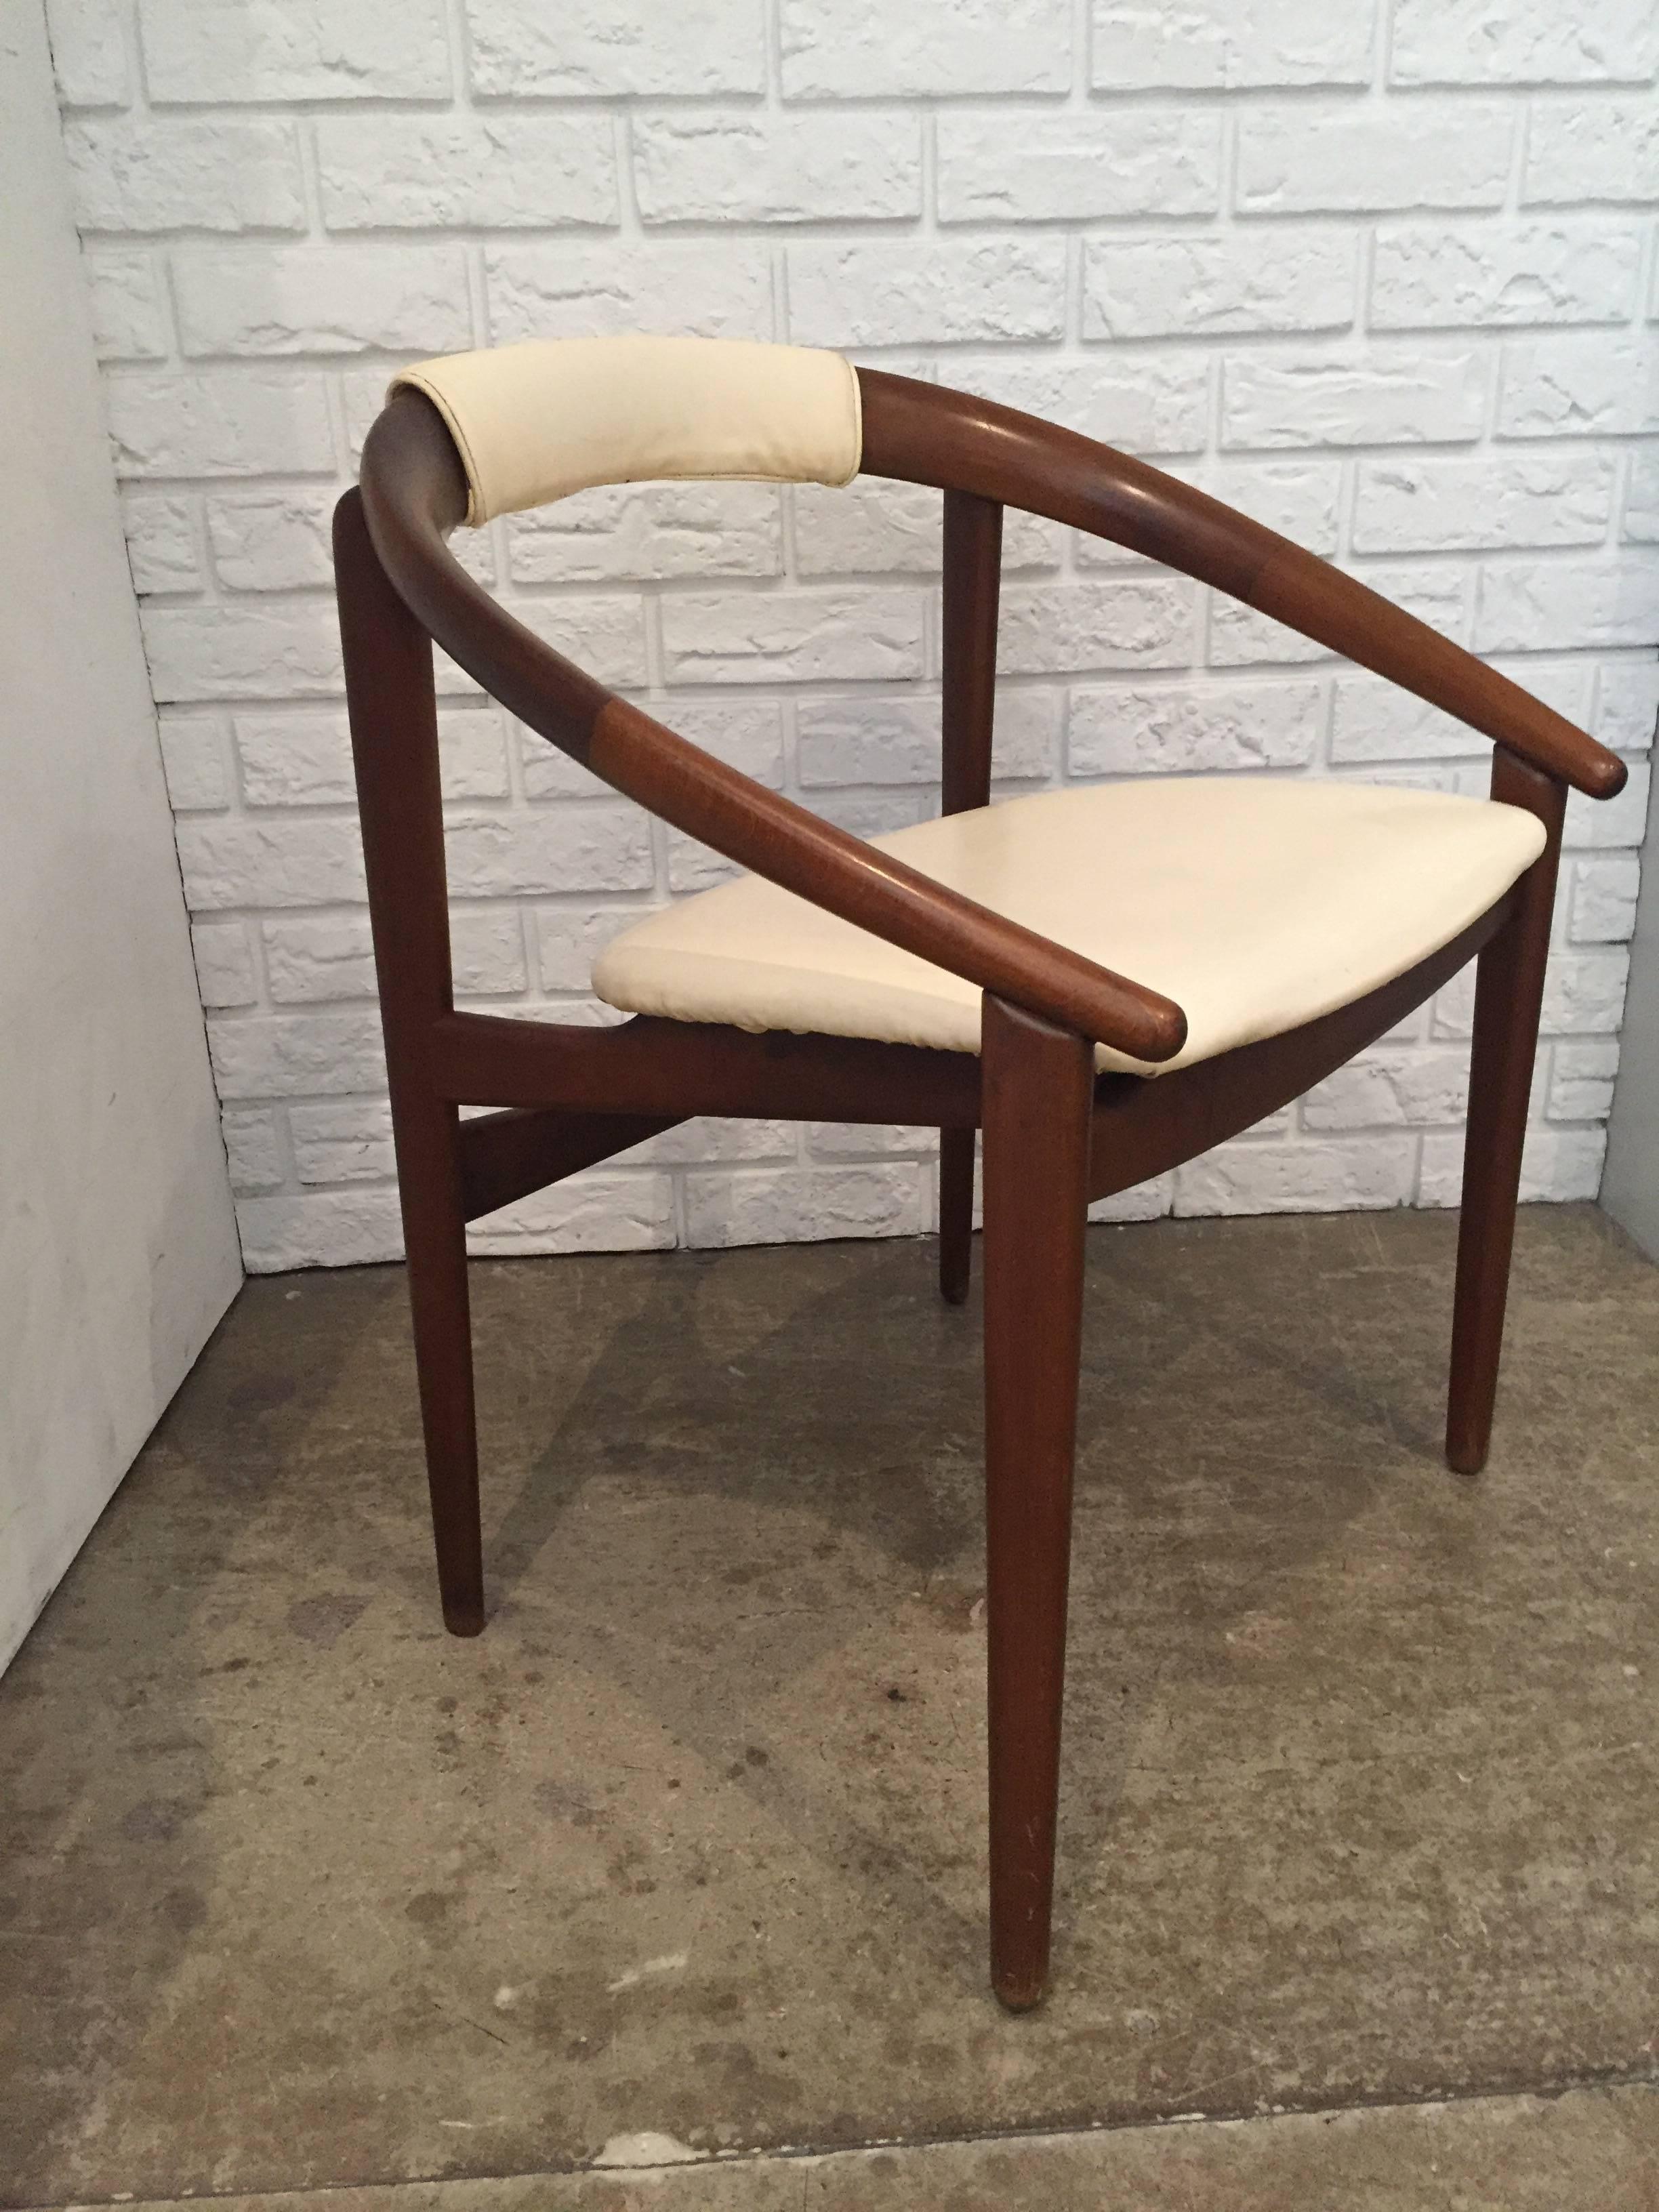 Pair of Mid-Century chairs. Rounded open back walnut frame with white leather seat and back.